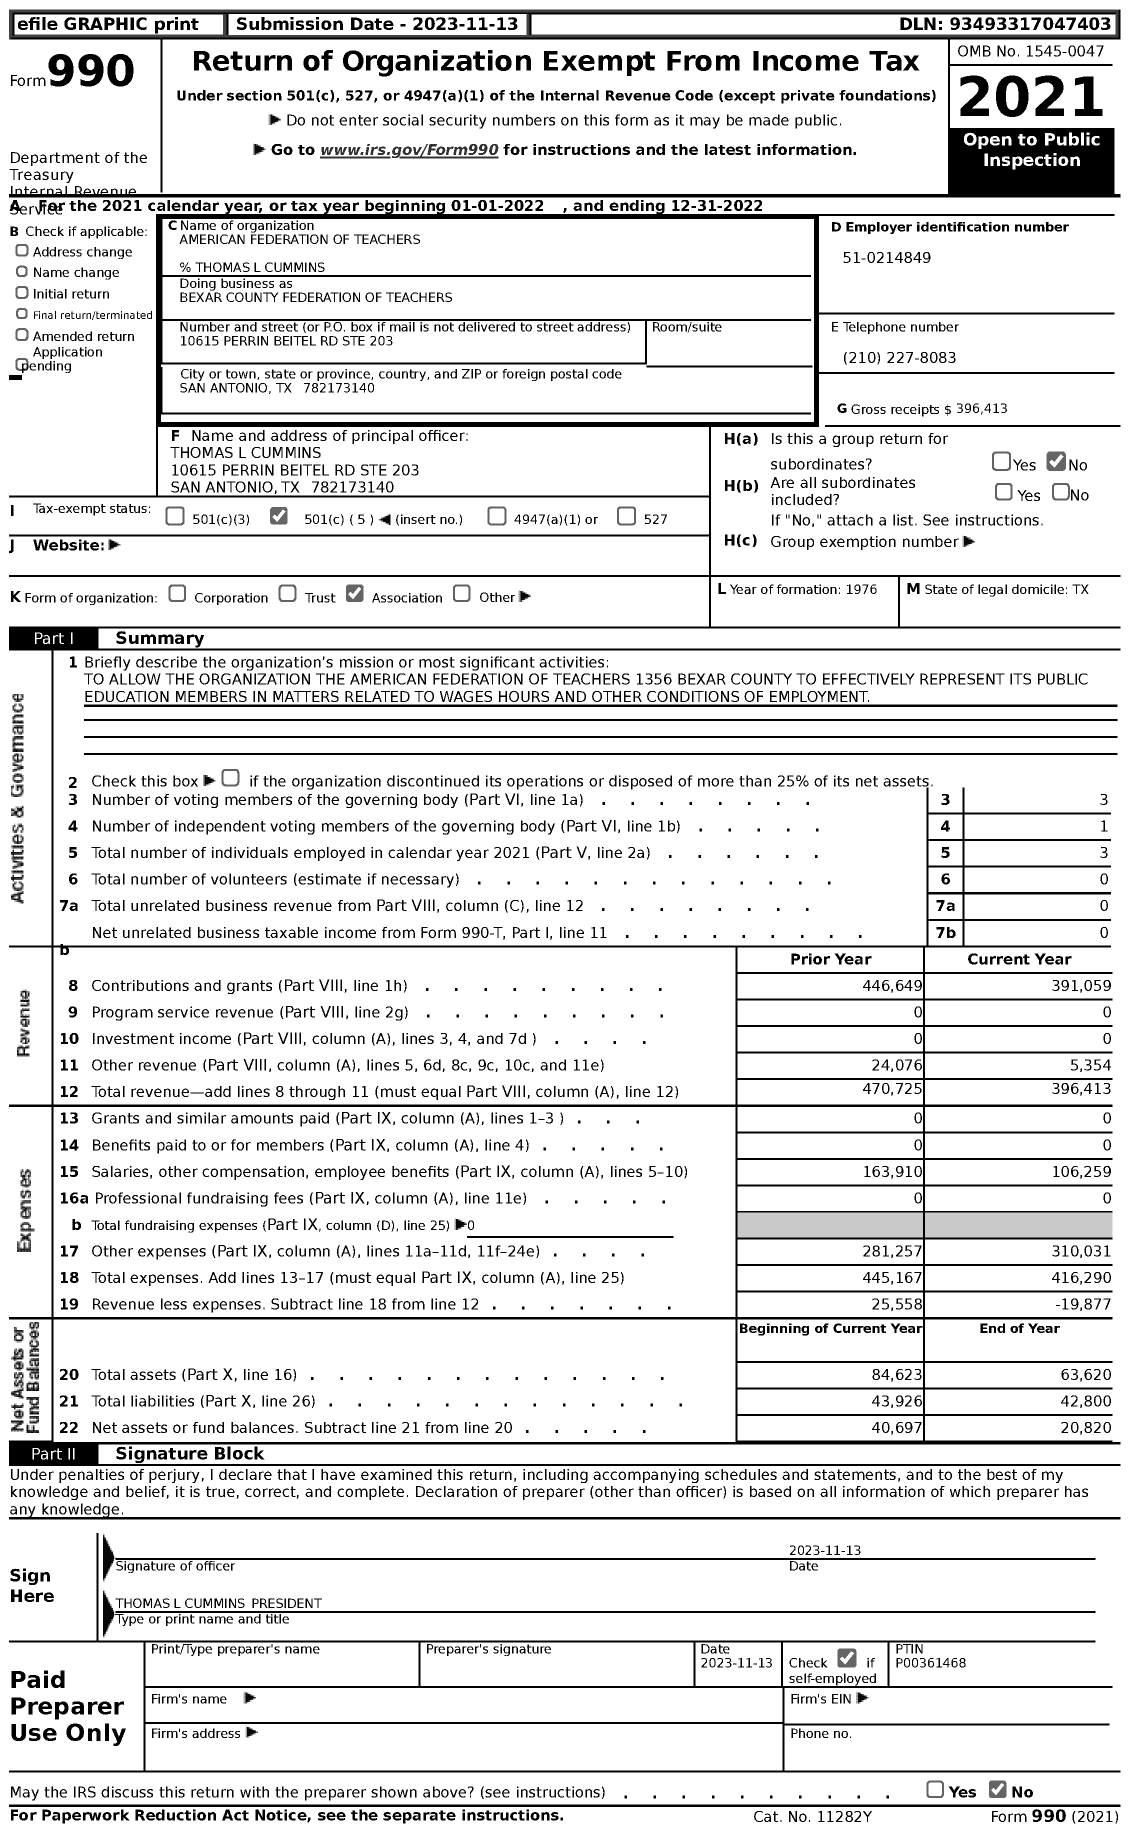 Image of first page of 2022 Form 990 for American Federation of Teachers - American Federation of Teachers 1356 Bexar County